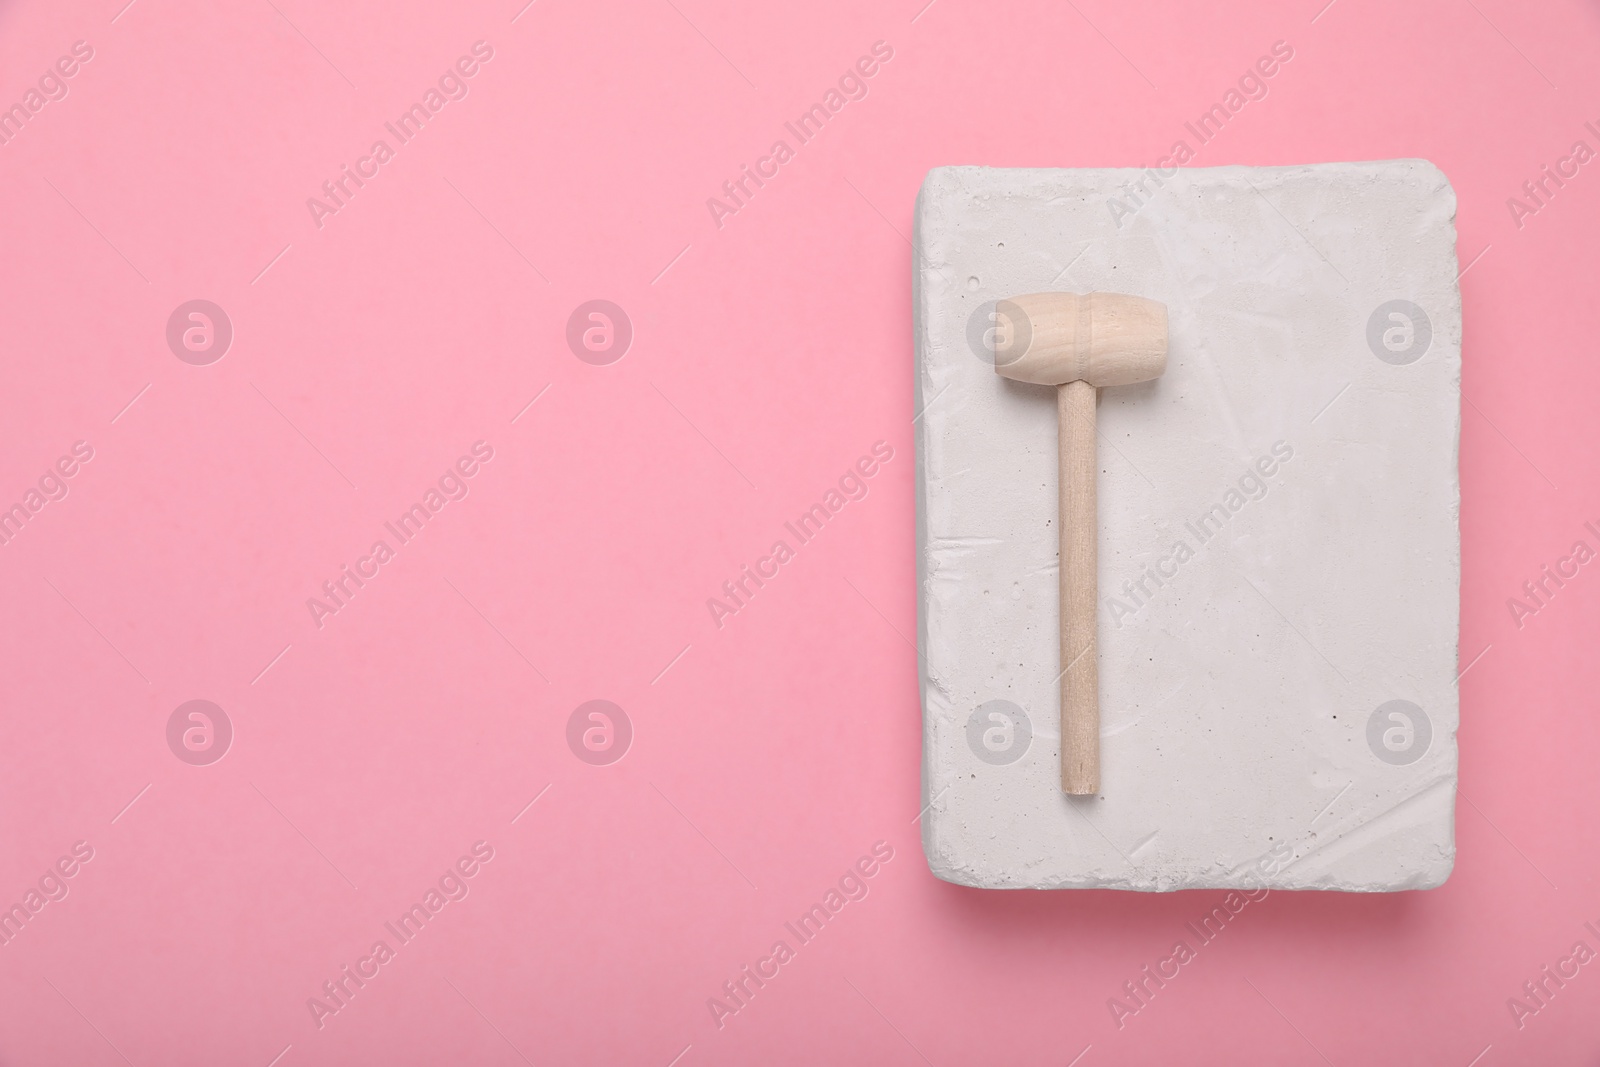 Photo of Educational toy for motor skills development. Excavation kit (plaster and wooden mallet) on pink background, top view with space for text